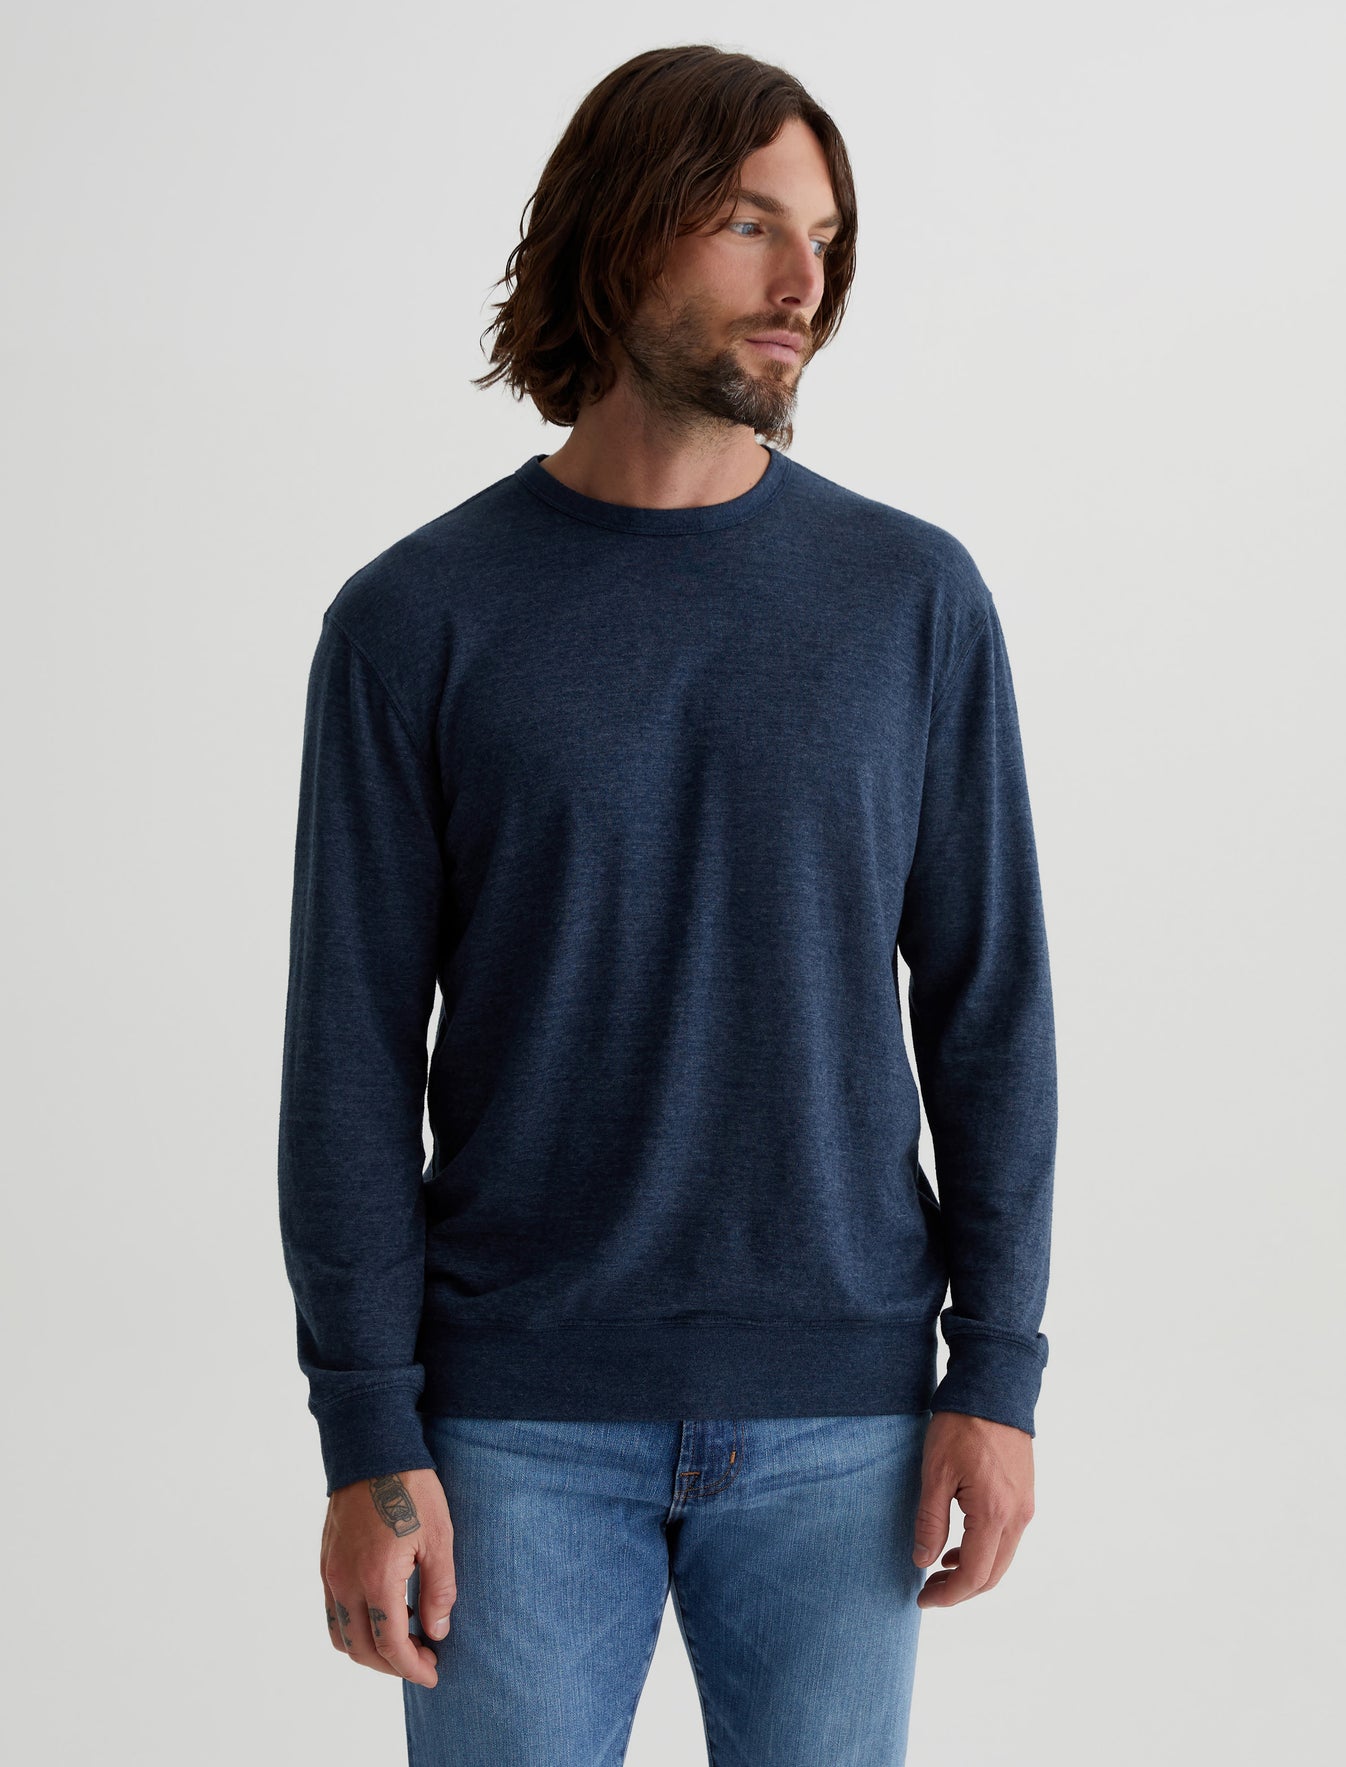 Wesley Pullover Ocean Storm Relaxed Fit Long Sleeve Crew Neck Pullover Mens Top Photo 1